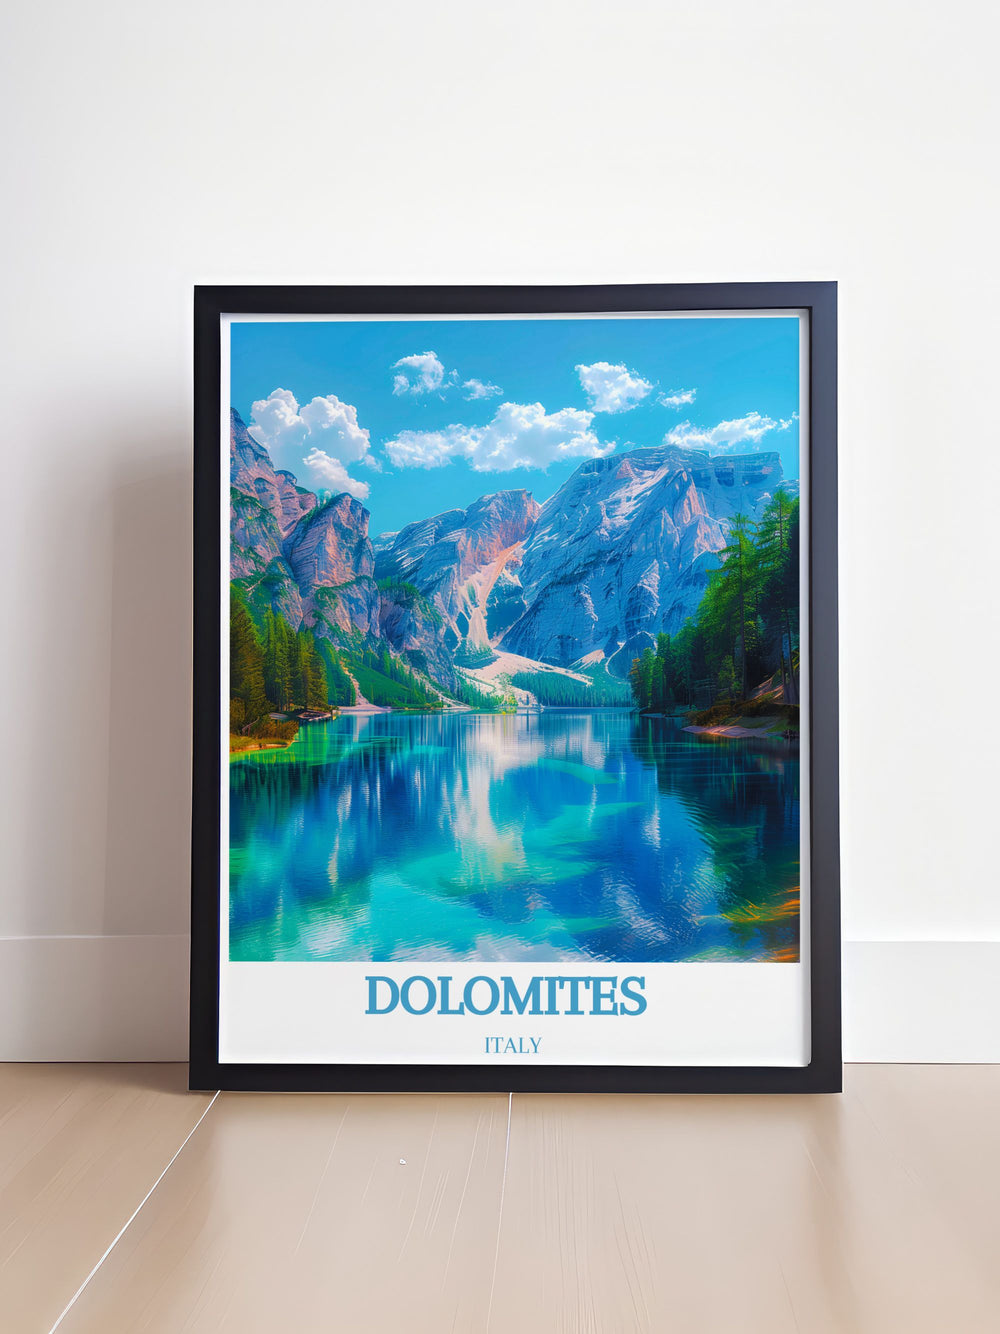 A detailed print of the Dolomites showcasing the dramatic alpine landscape and iconic views of Lago di Braies, perfect for nature lovers and adventure enthusiasts.